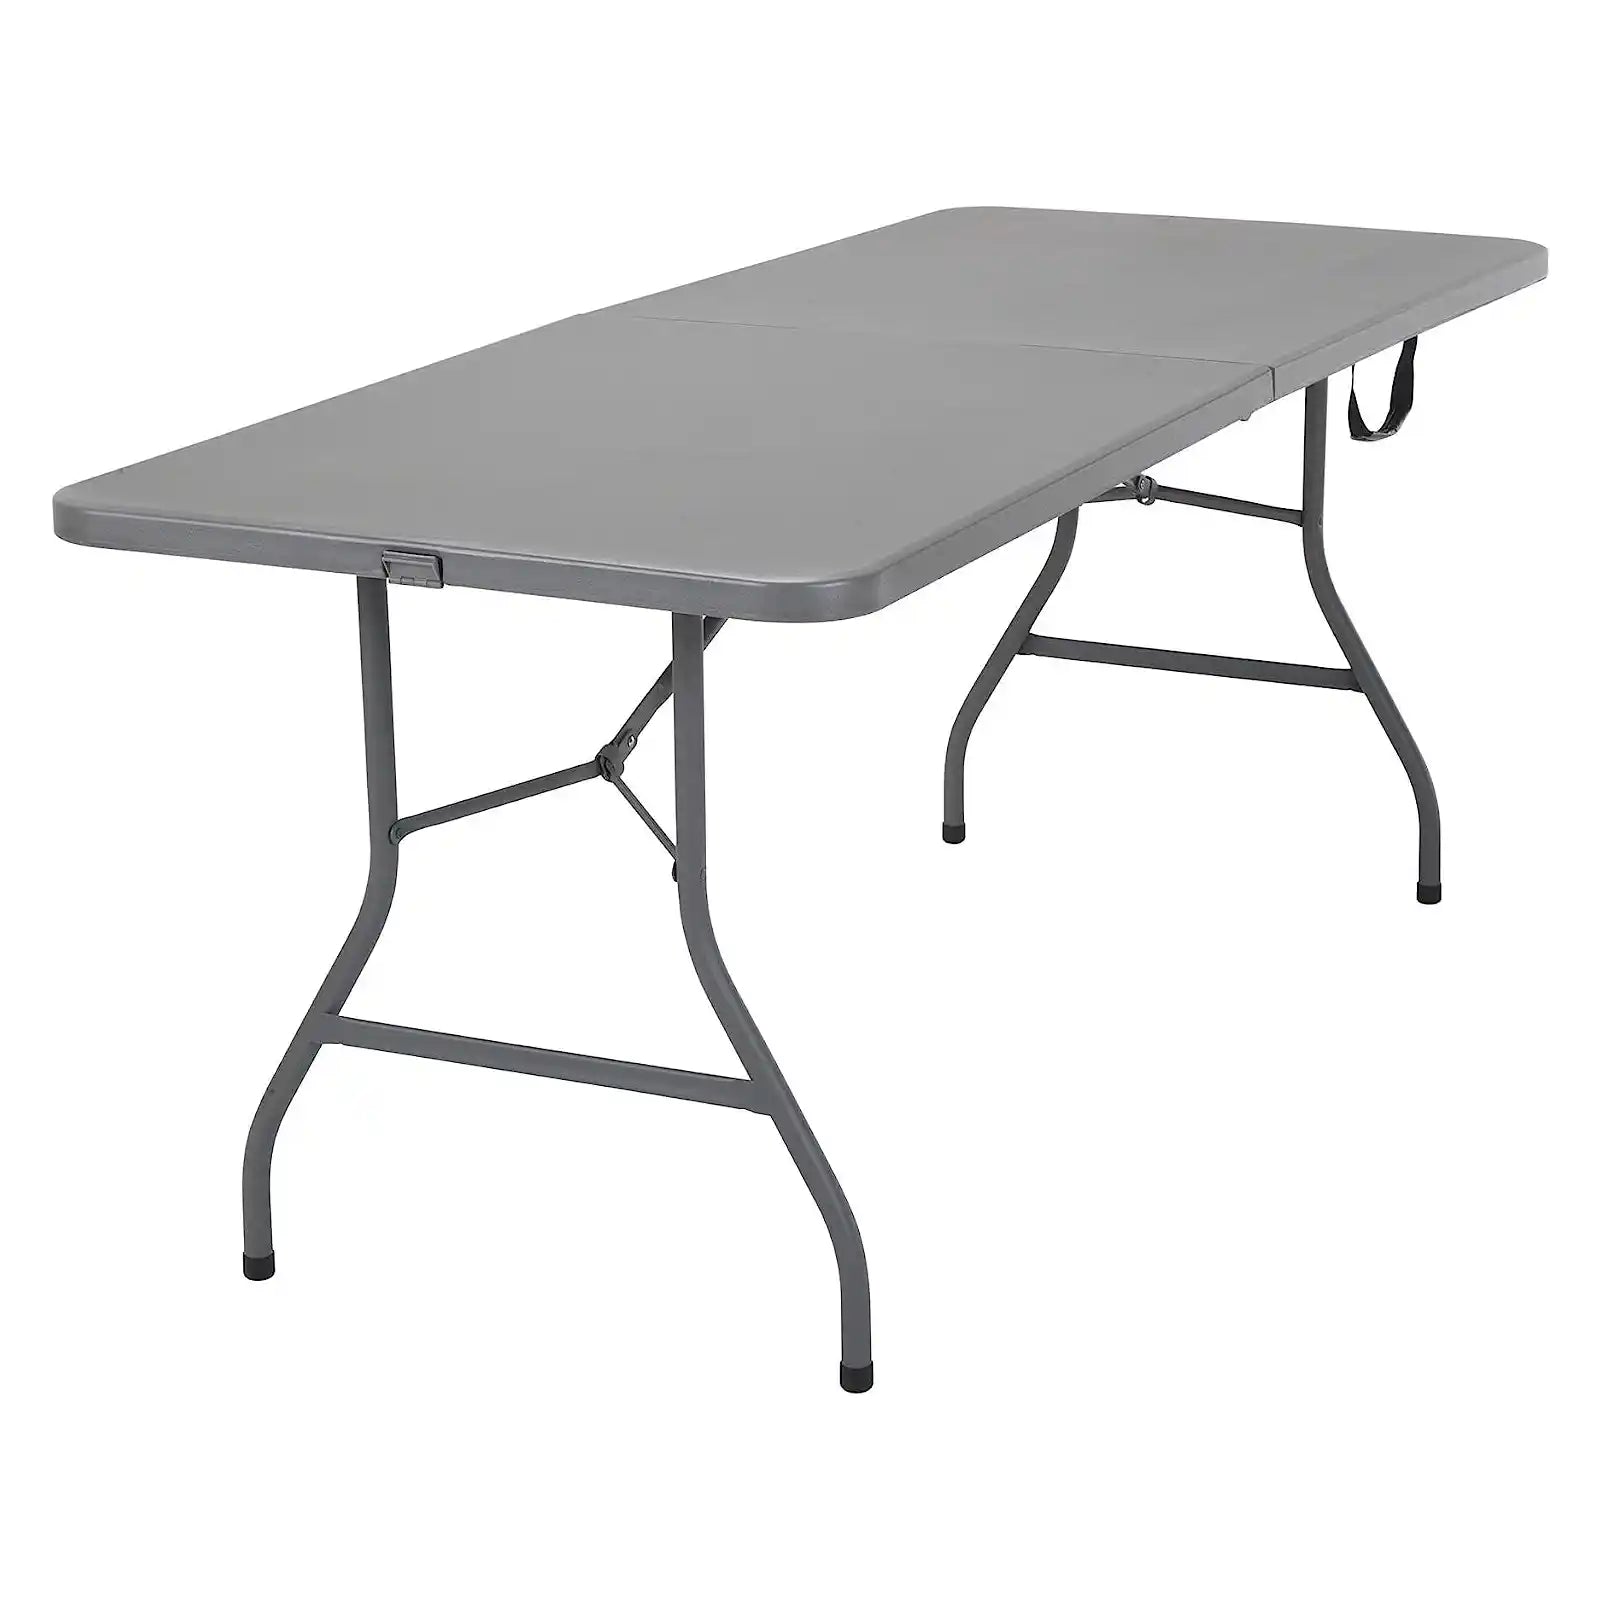 Foldable Rectangular Dining Table for Outdoor